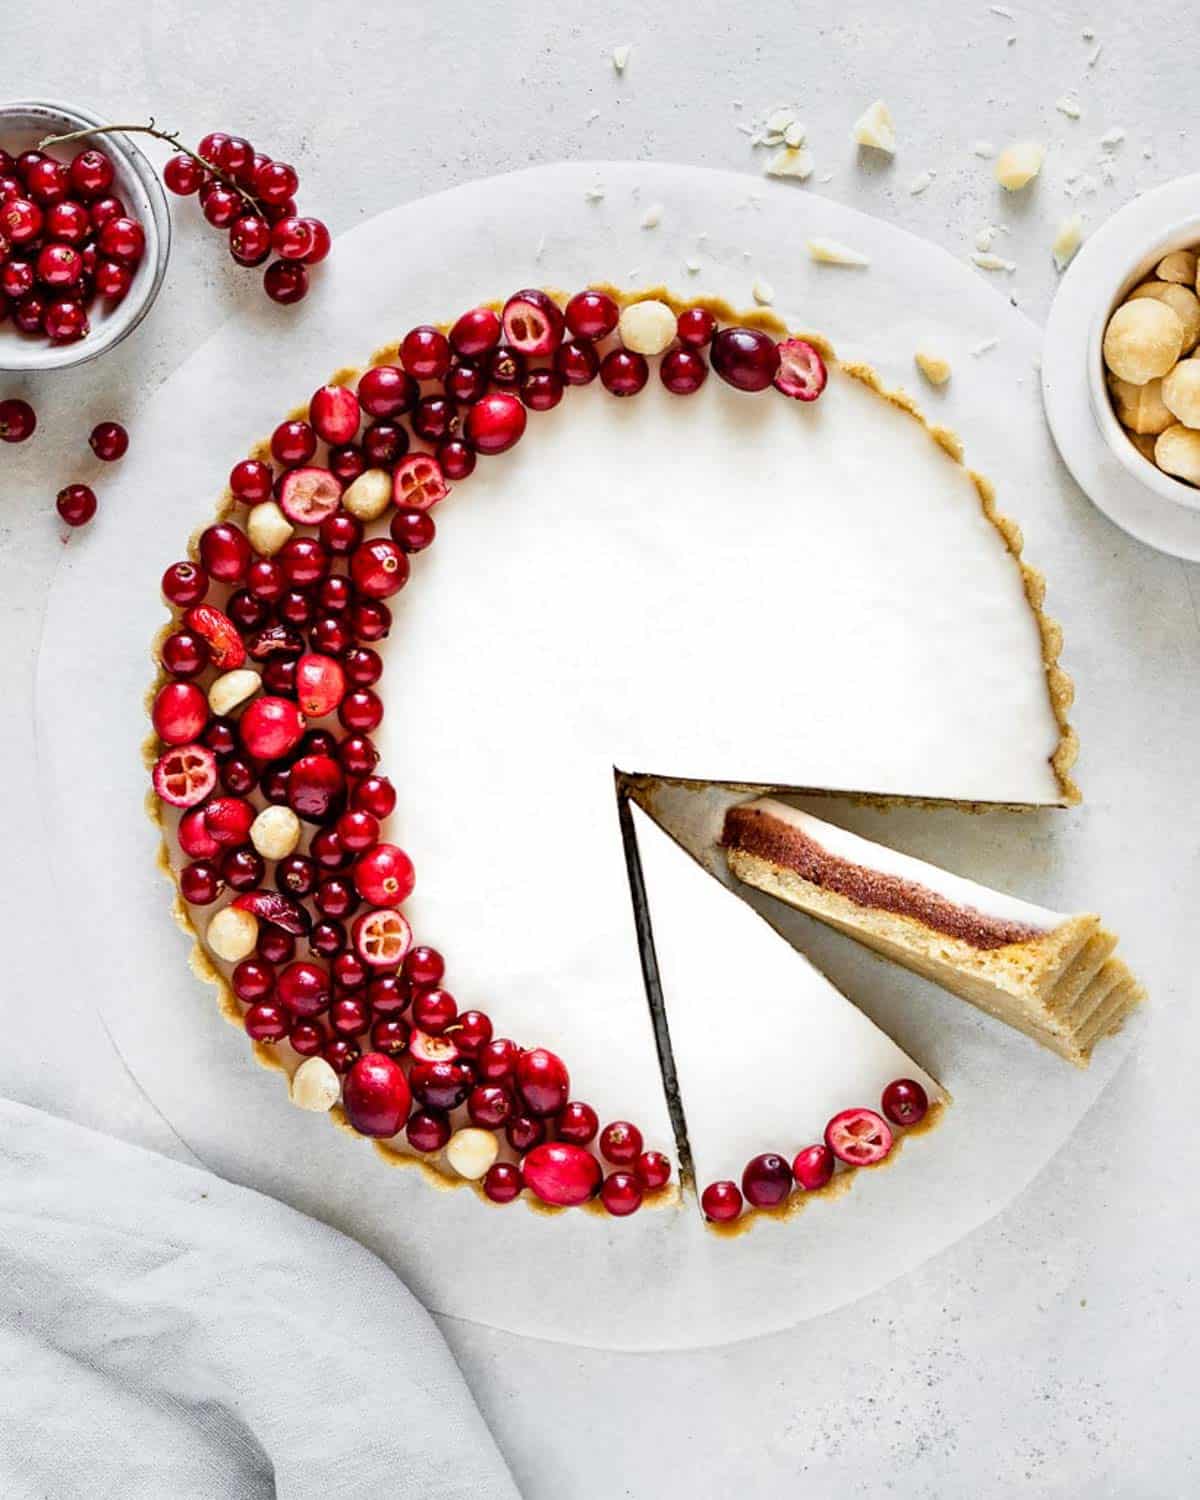 a crisp white tart decorated with cranberries with a slice turned on its side to show the layers within.